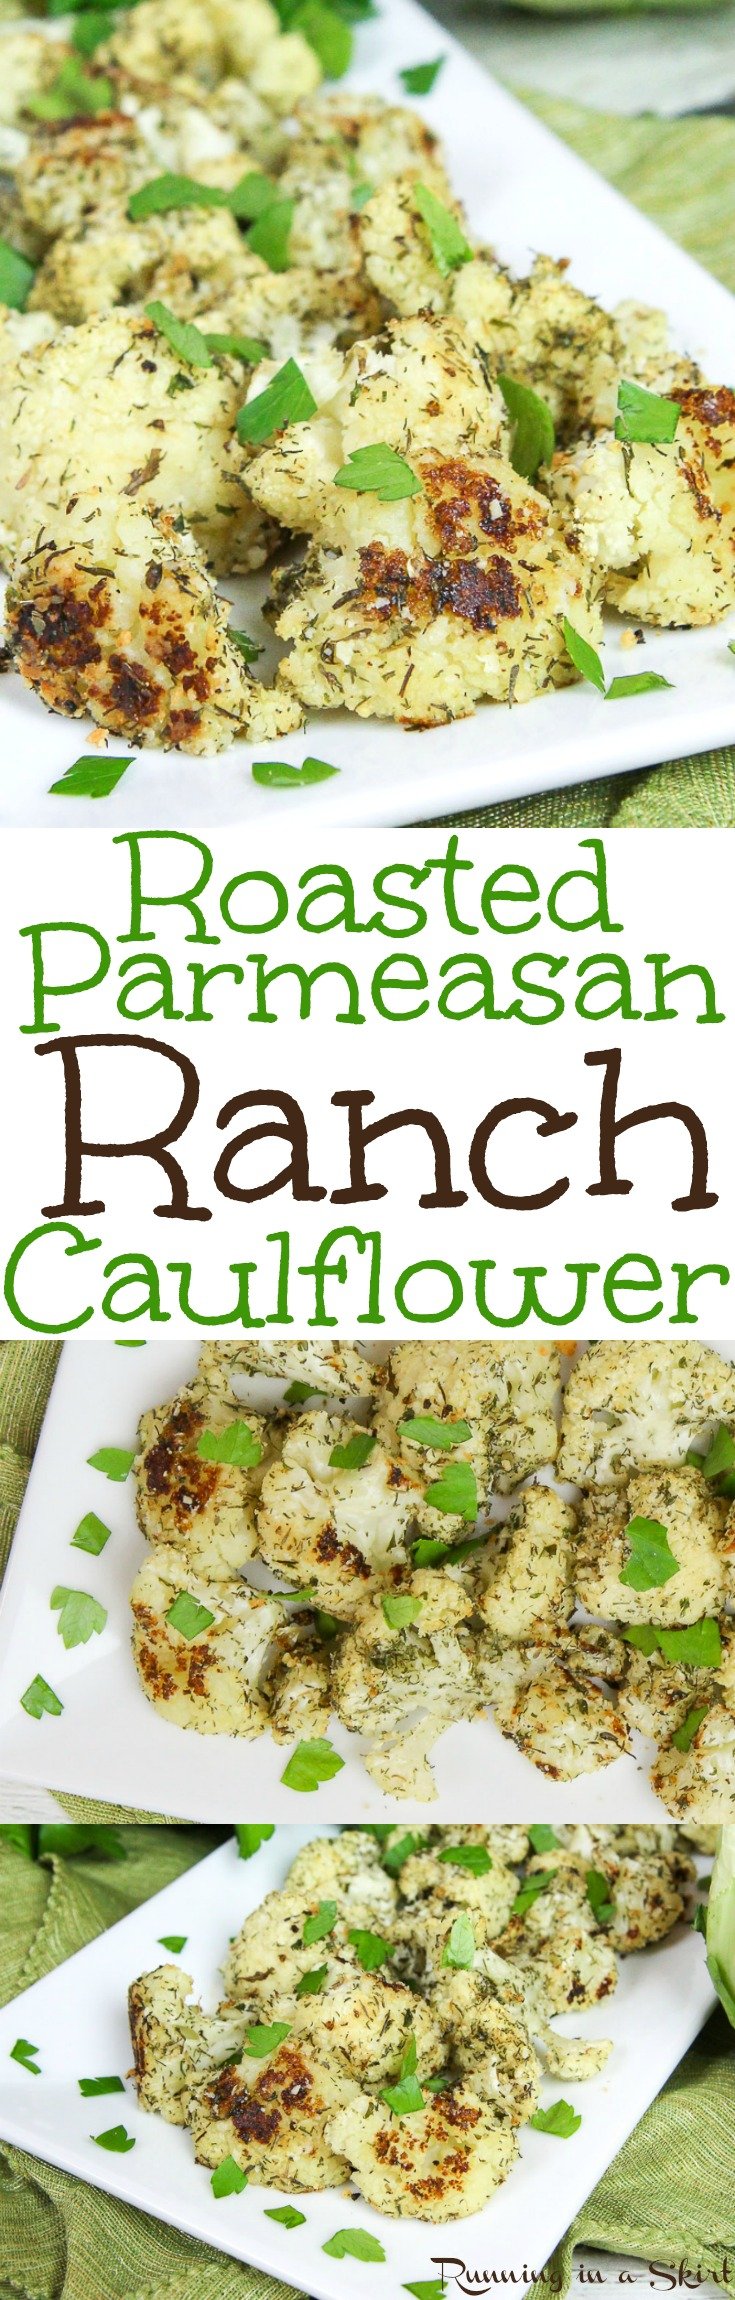 Healthy Roasted Parmesan Ranch Cauliflower Bites recipe. Baked in the oven with homemade ranch seasoning. A tasty low carb side dish or snack. Easy, simple and totally addictive! / Running in a Skirt via @juliewunder